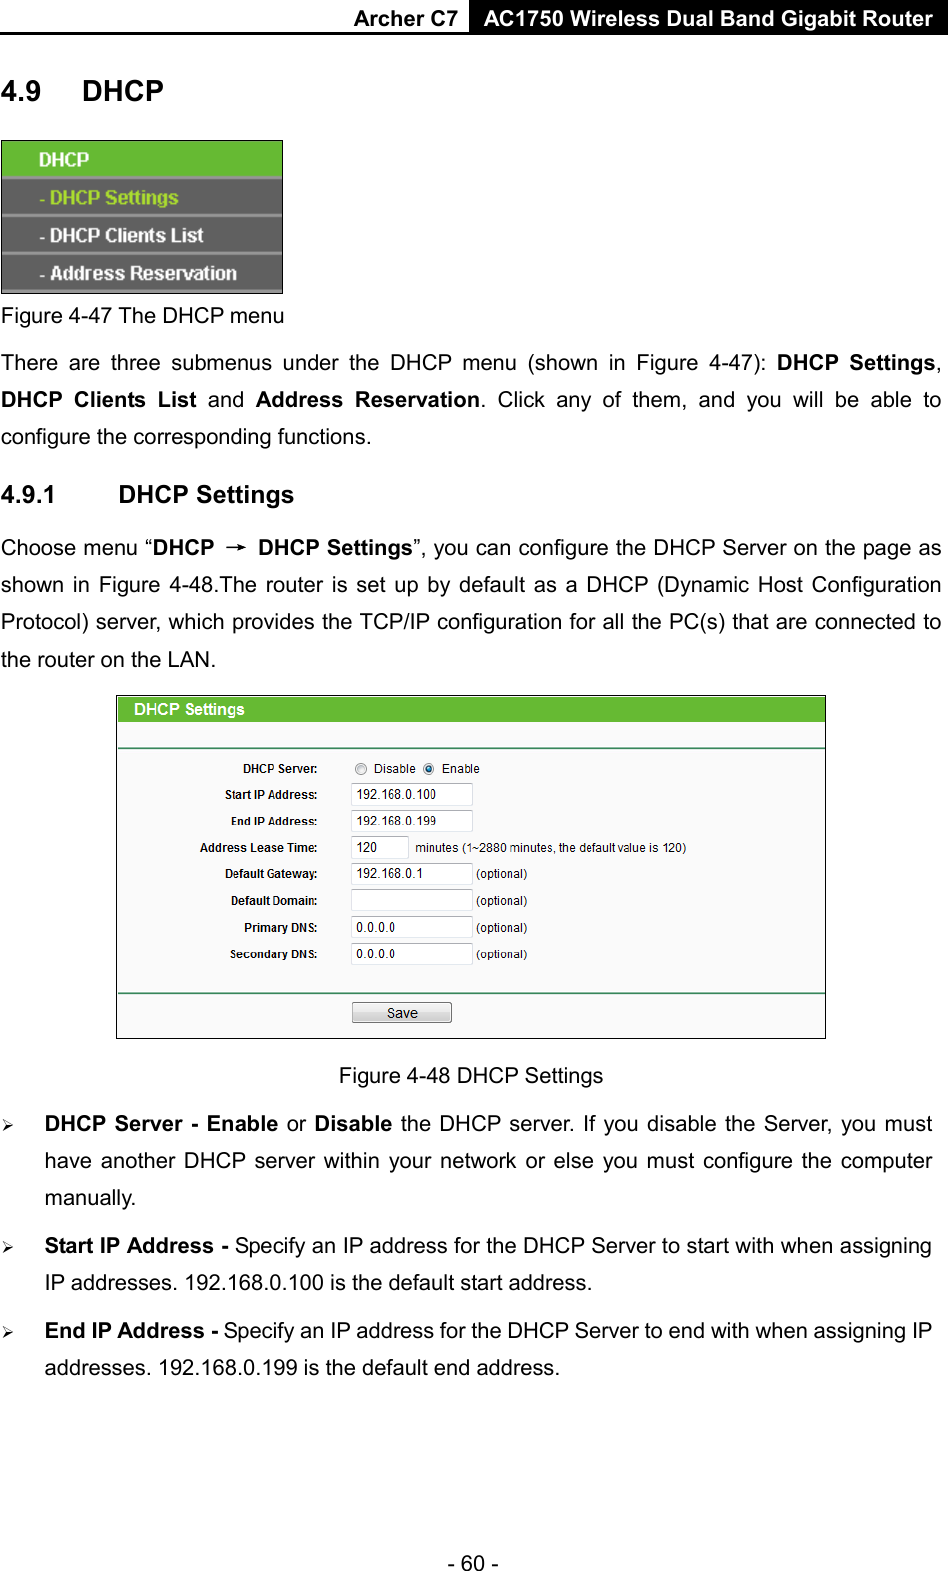 Archer C7 AC1750 Wireless Dual Band Gigabit Router  4.9 DHCP  Figure 4-47 The DHCP menu There are three submenus under the DHCP menu (shown in Figure  4-47):  DHCP Settings, DHCP Clients List and  Address Reservation. Click any of them, and you will be able to configure the corresponding functions. 4.9.1 DHCP Settings Choose menu “DHCP → DHCP Settings”, you can configure the DHCP Server on the page as shown in Figure 4-48.The  router is set up by default as a DHCP (Dynamic Host Configuration Protocol) server, which provides the TCP/IP configuration for all the PC(s) that are connected to the router on the LAN.    Figure 4-48 DHCP Settings  DHCP Server - Enable or Disable the DHCP server. If you disable the Server, you must have another DHCP server within your network or else you must configure the computer manually.  Start IP Address - Specify an IP address for the DHCP Server to start with when assigning IP addresses. 192.168.0.100 is the default start address.  End IP Address - Specify an IP address for the DHCP Server to end with when assigning IP addresses. 192.168.0.199 is the default end address. - 60 - 